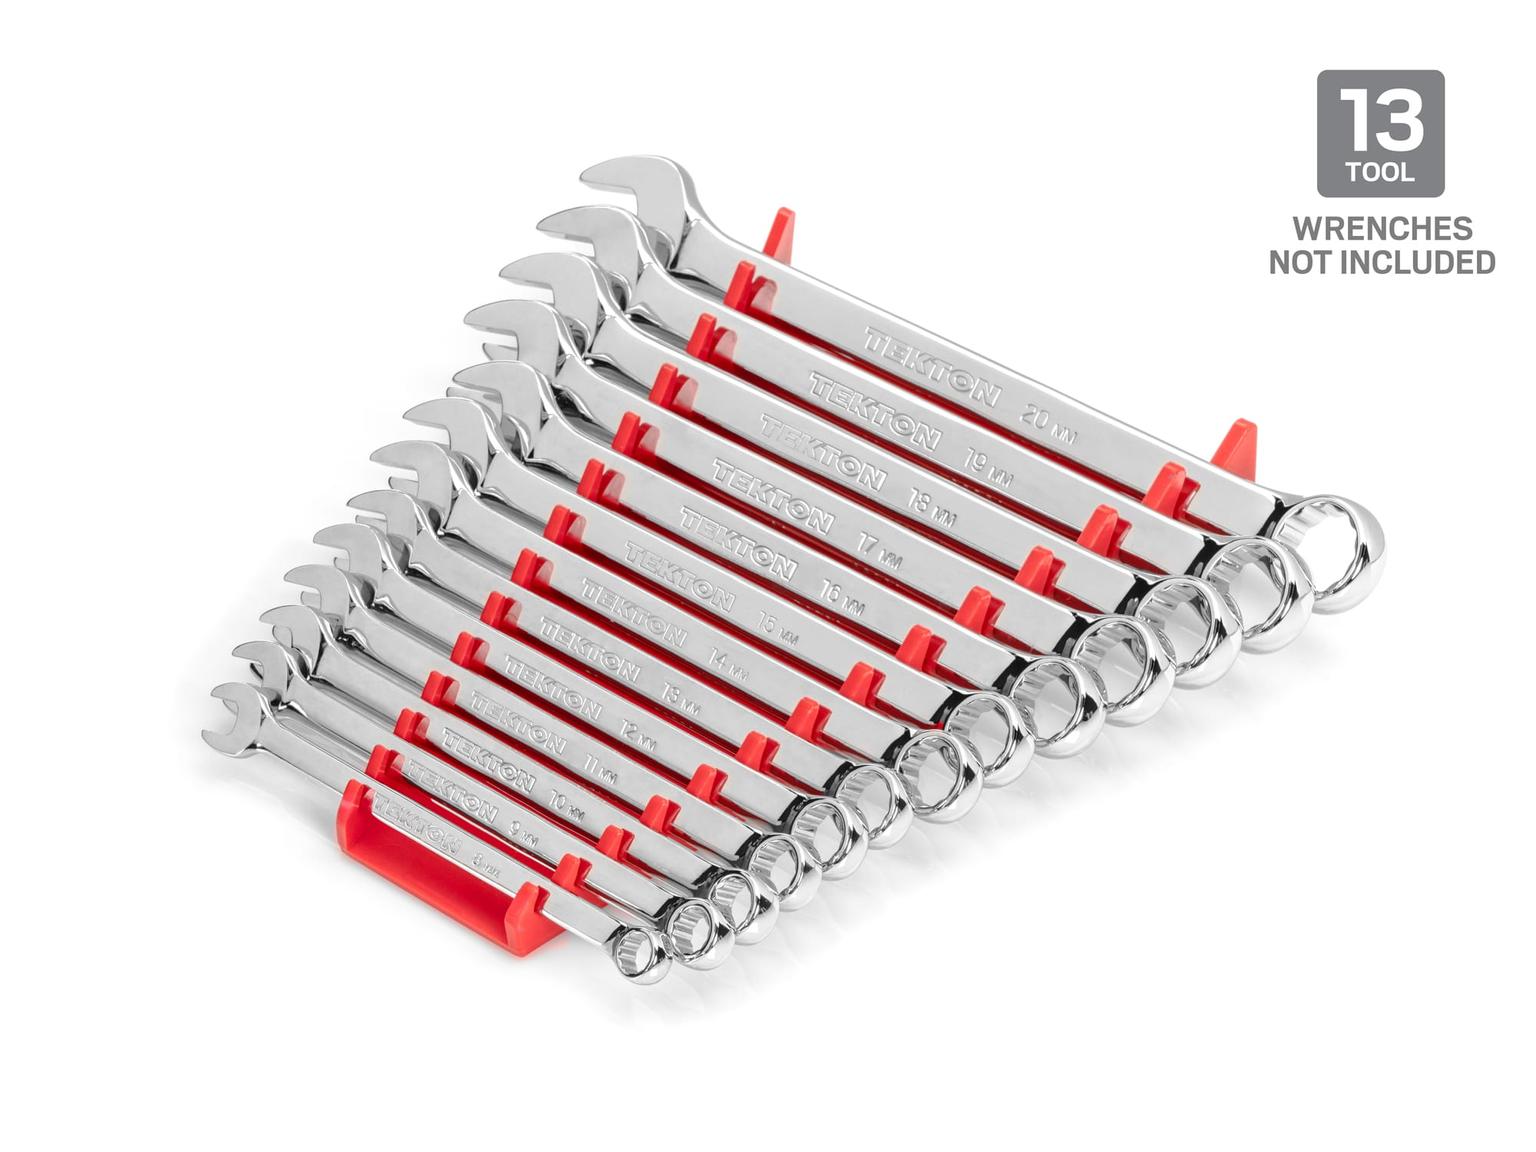 TEKTON ORG29213-T 13-Tool Combination Wrench Organizer Rack (Red)